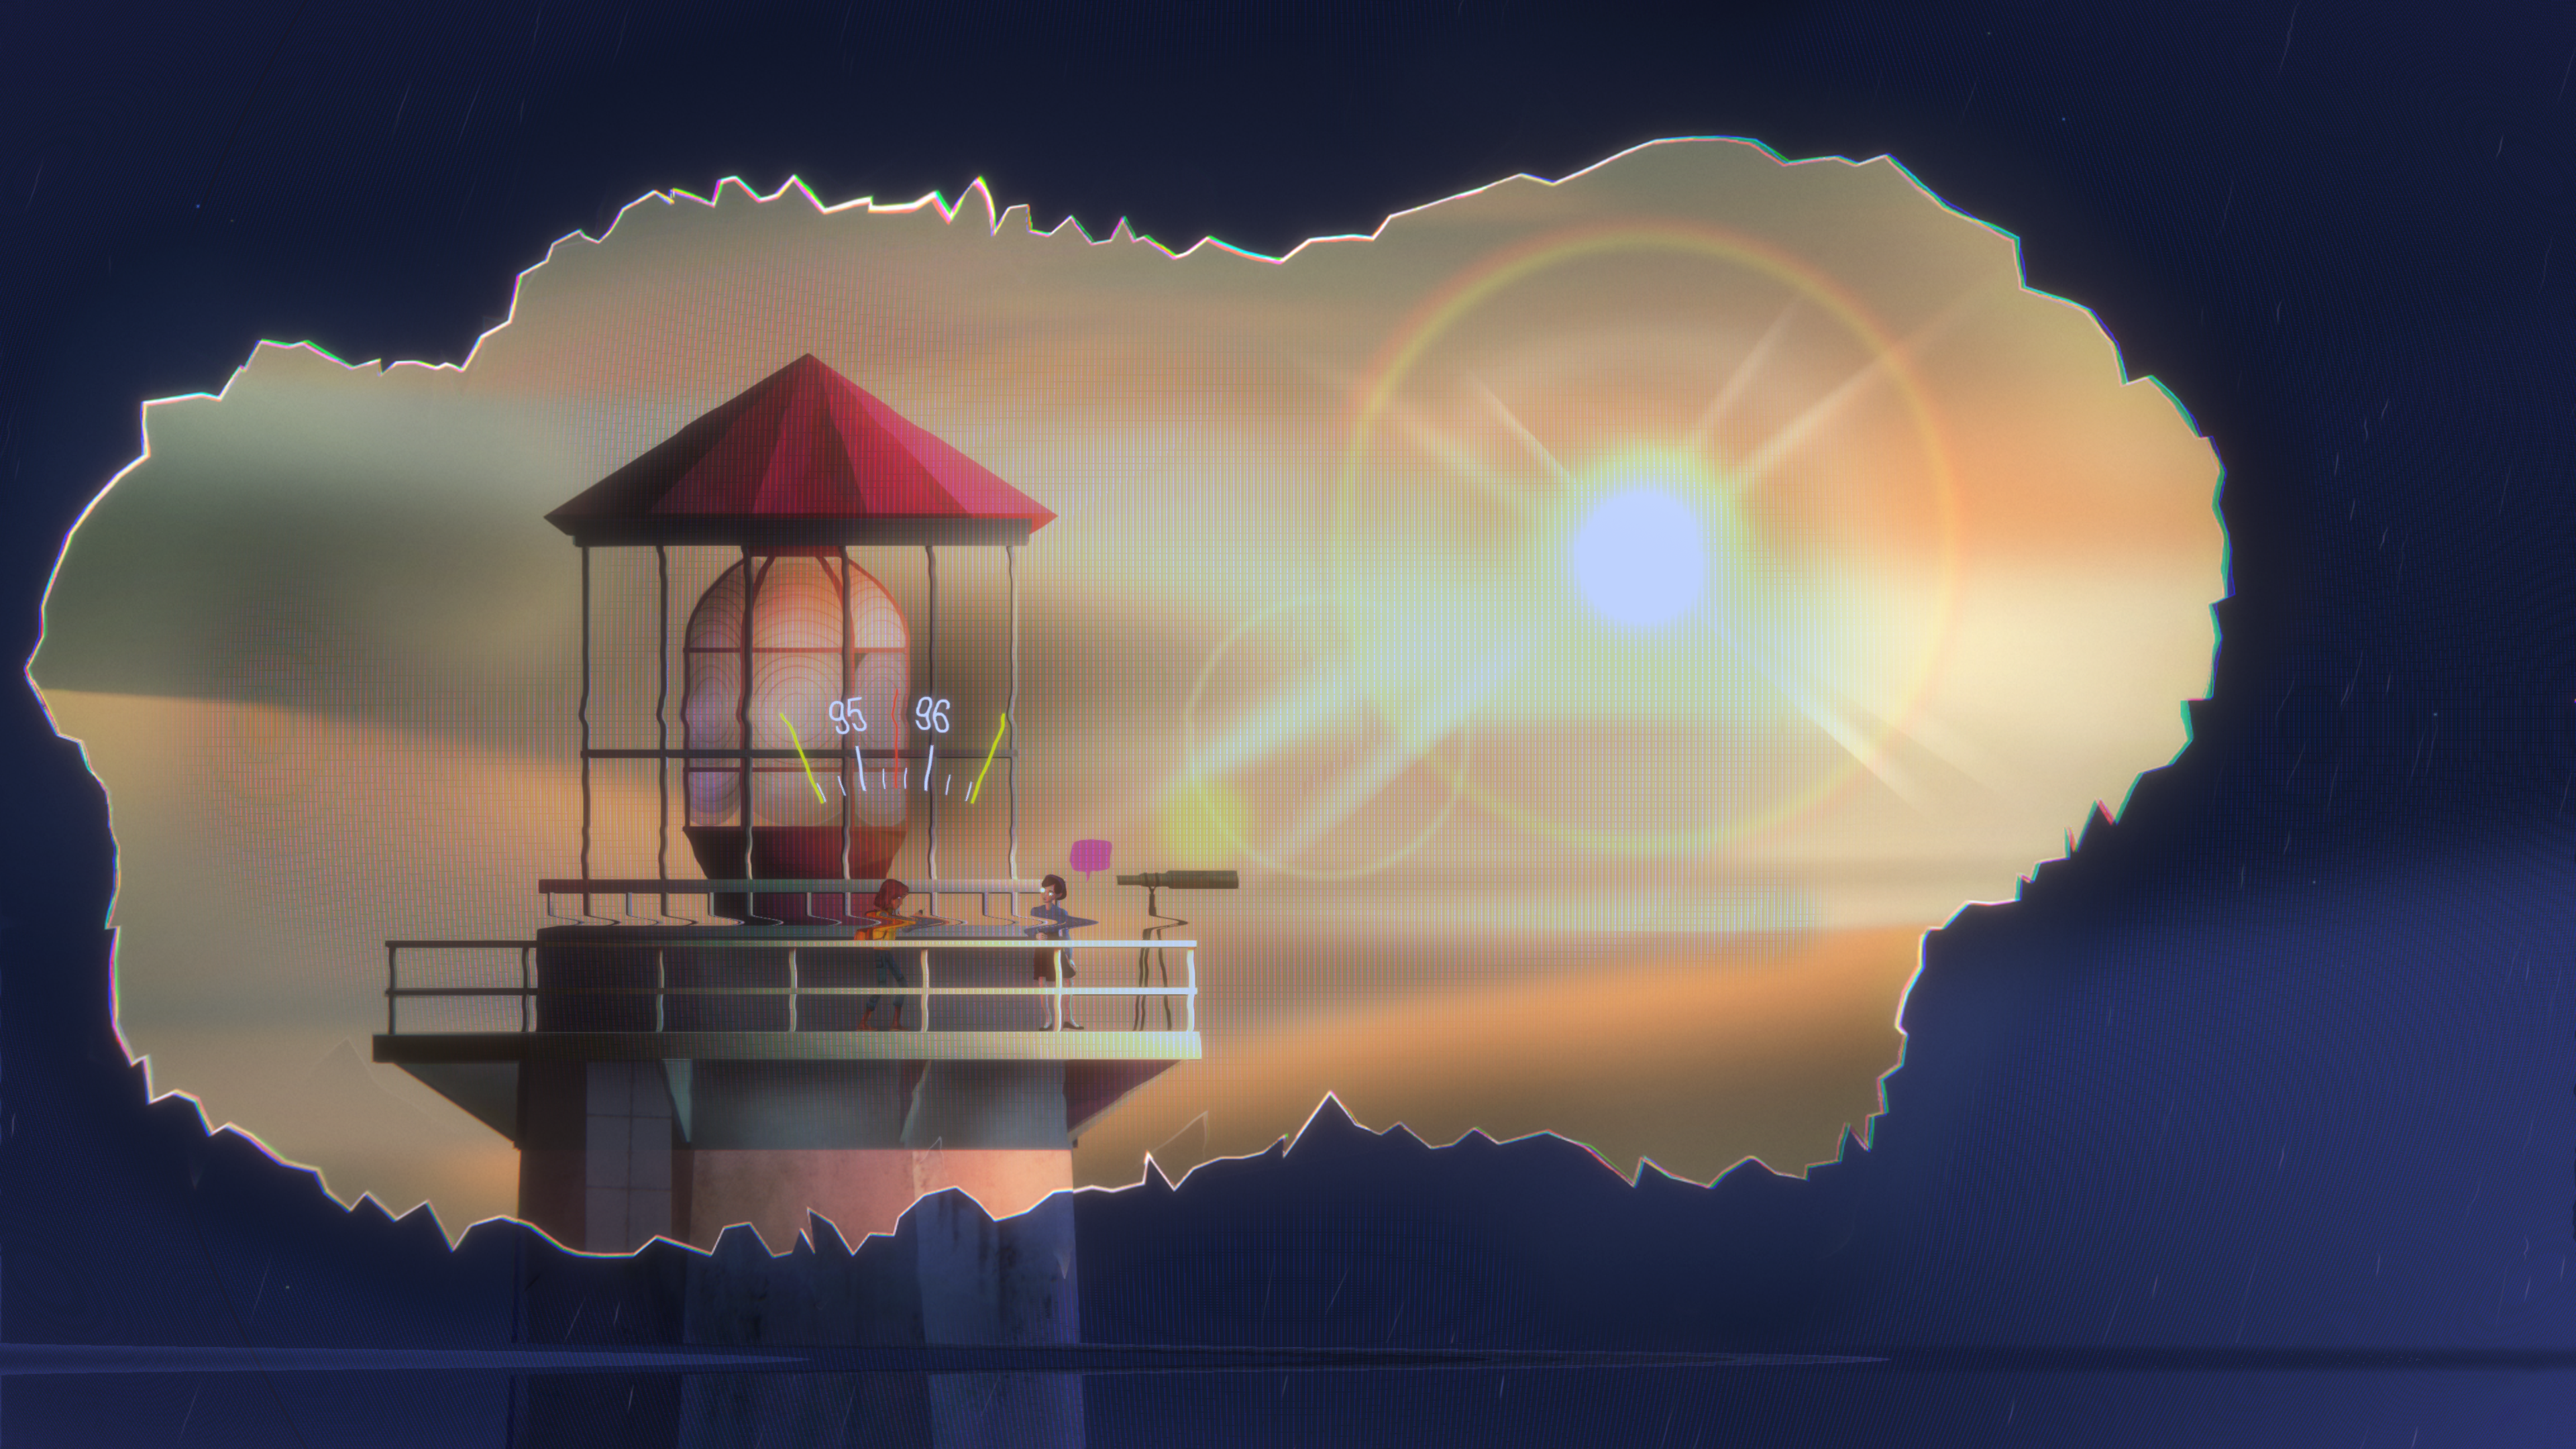 A character peers through a telescope atop a lighthouse in Oxenfree 2